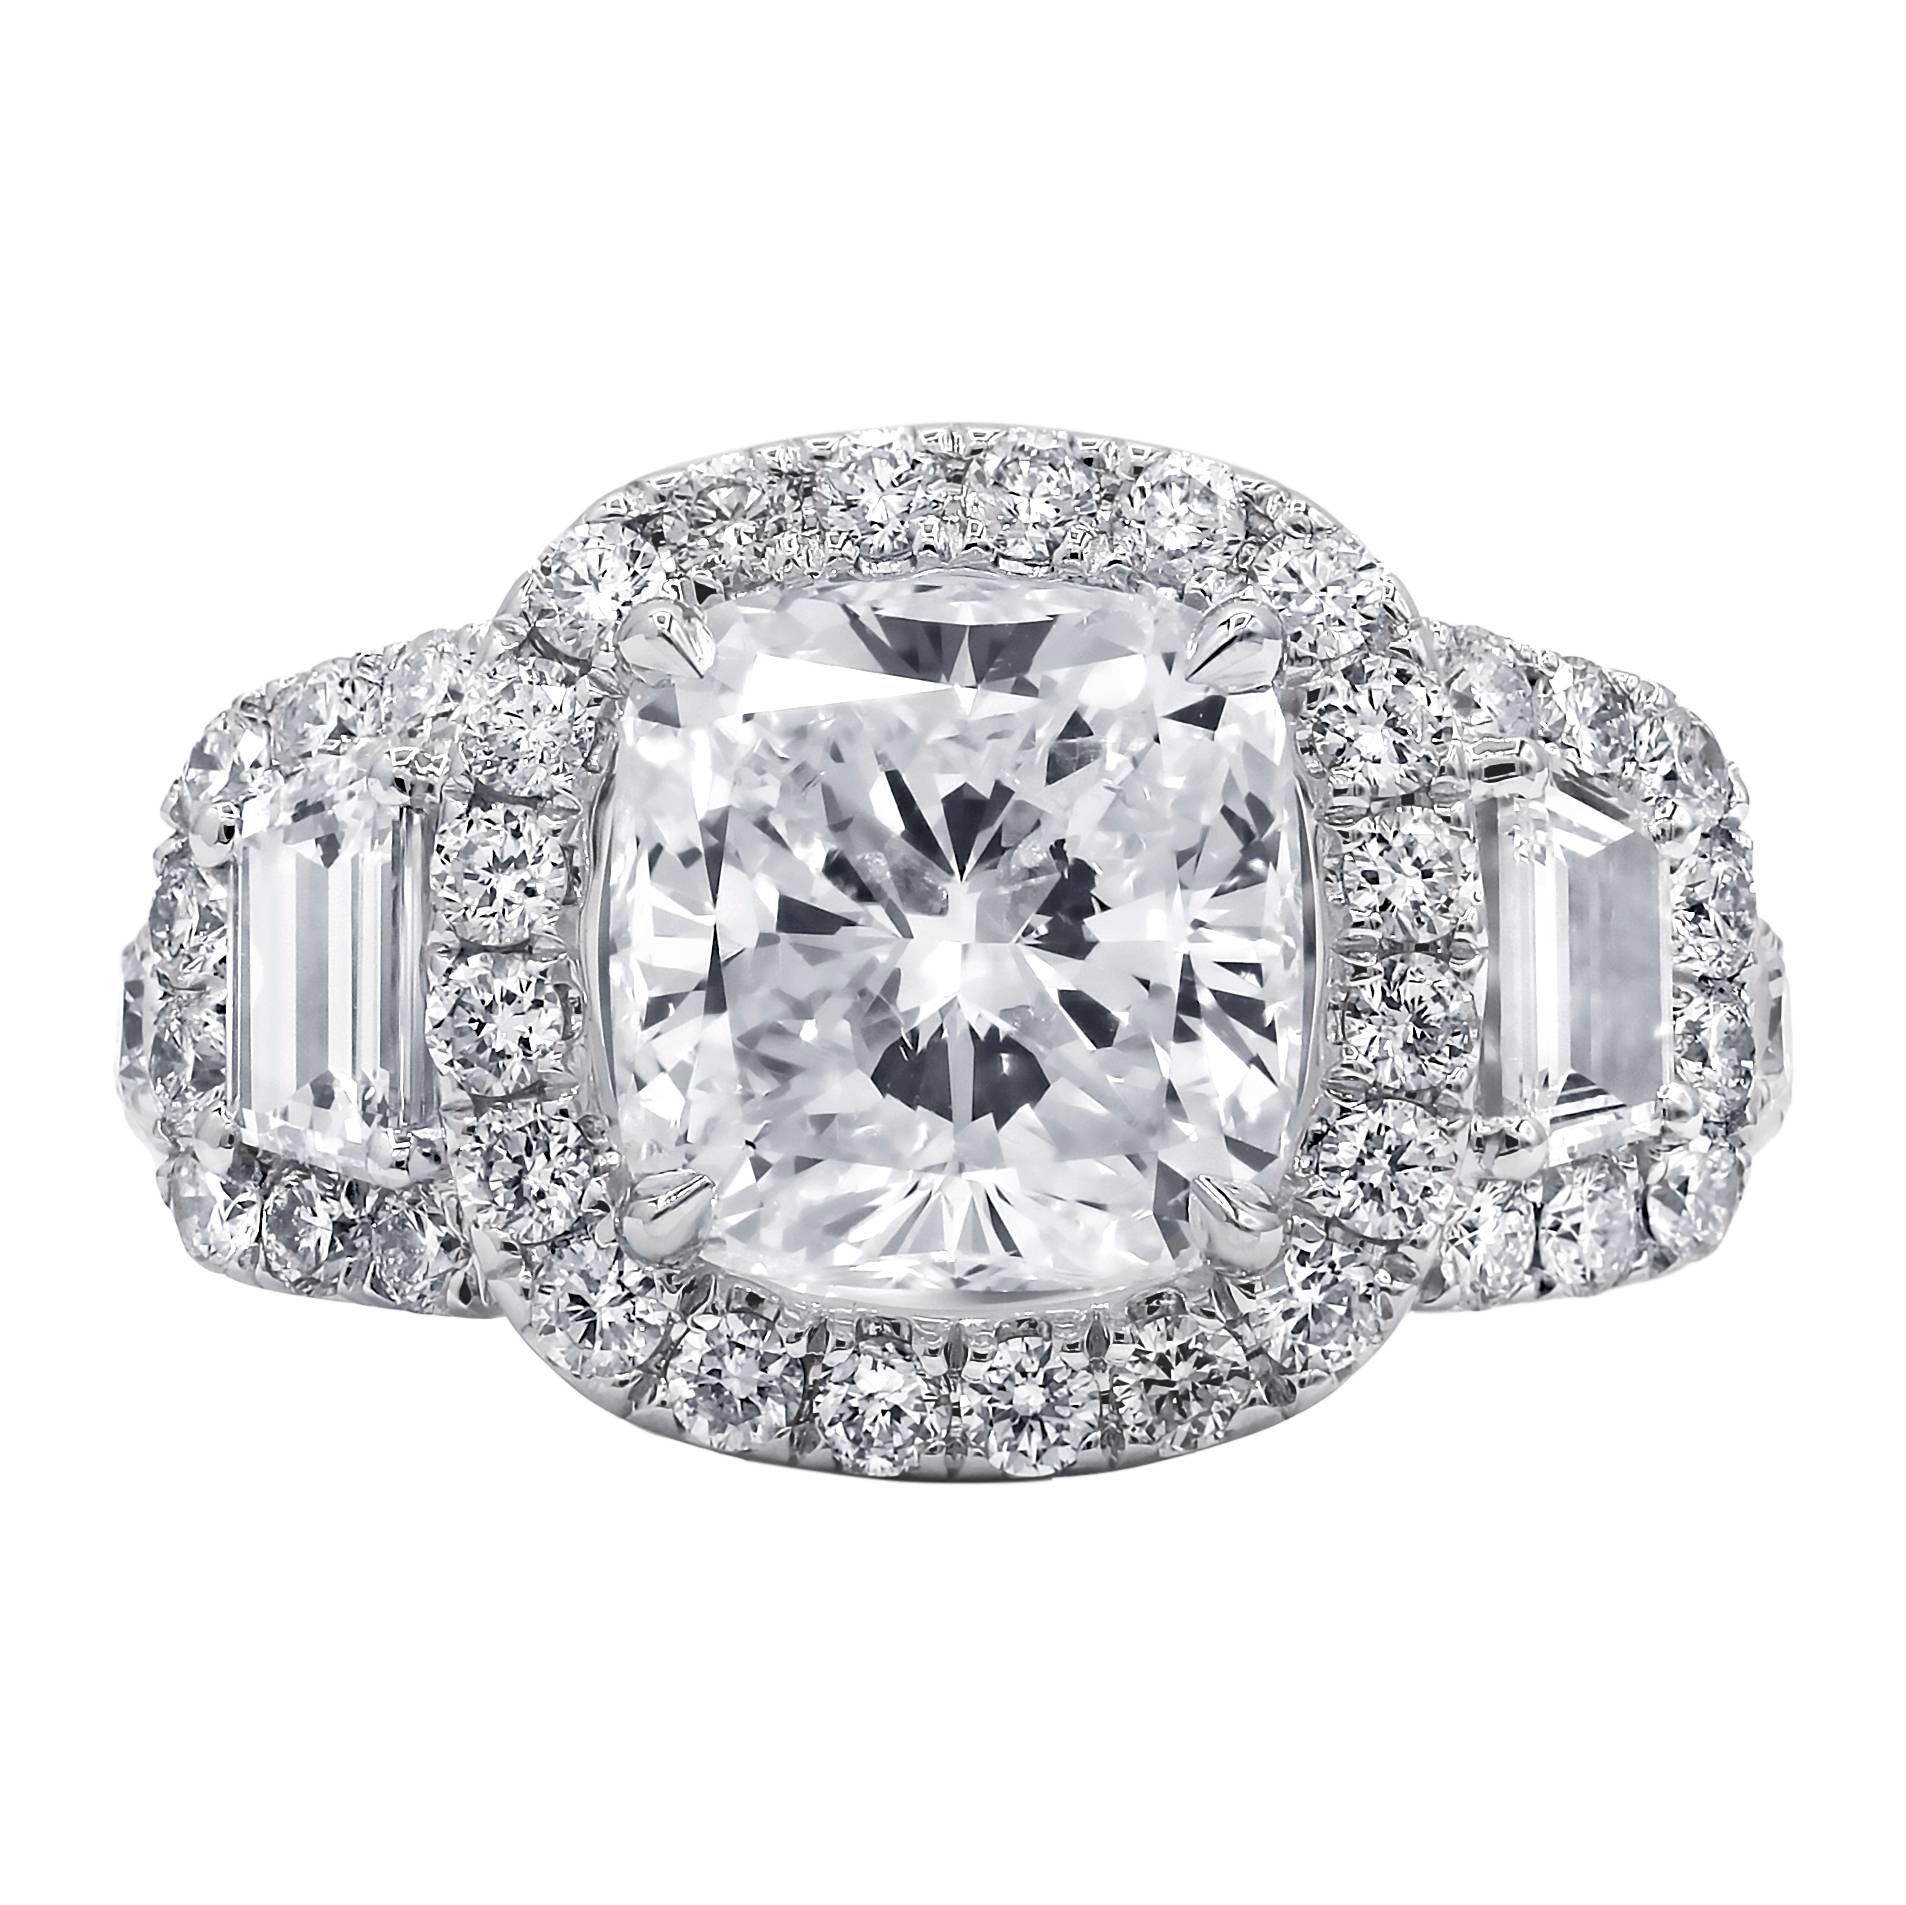 GIA Certified 3.05 Cushion Cut Diamond Engagement Ring For Sale